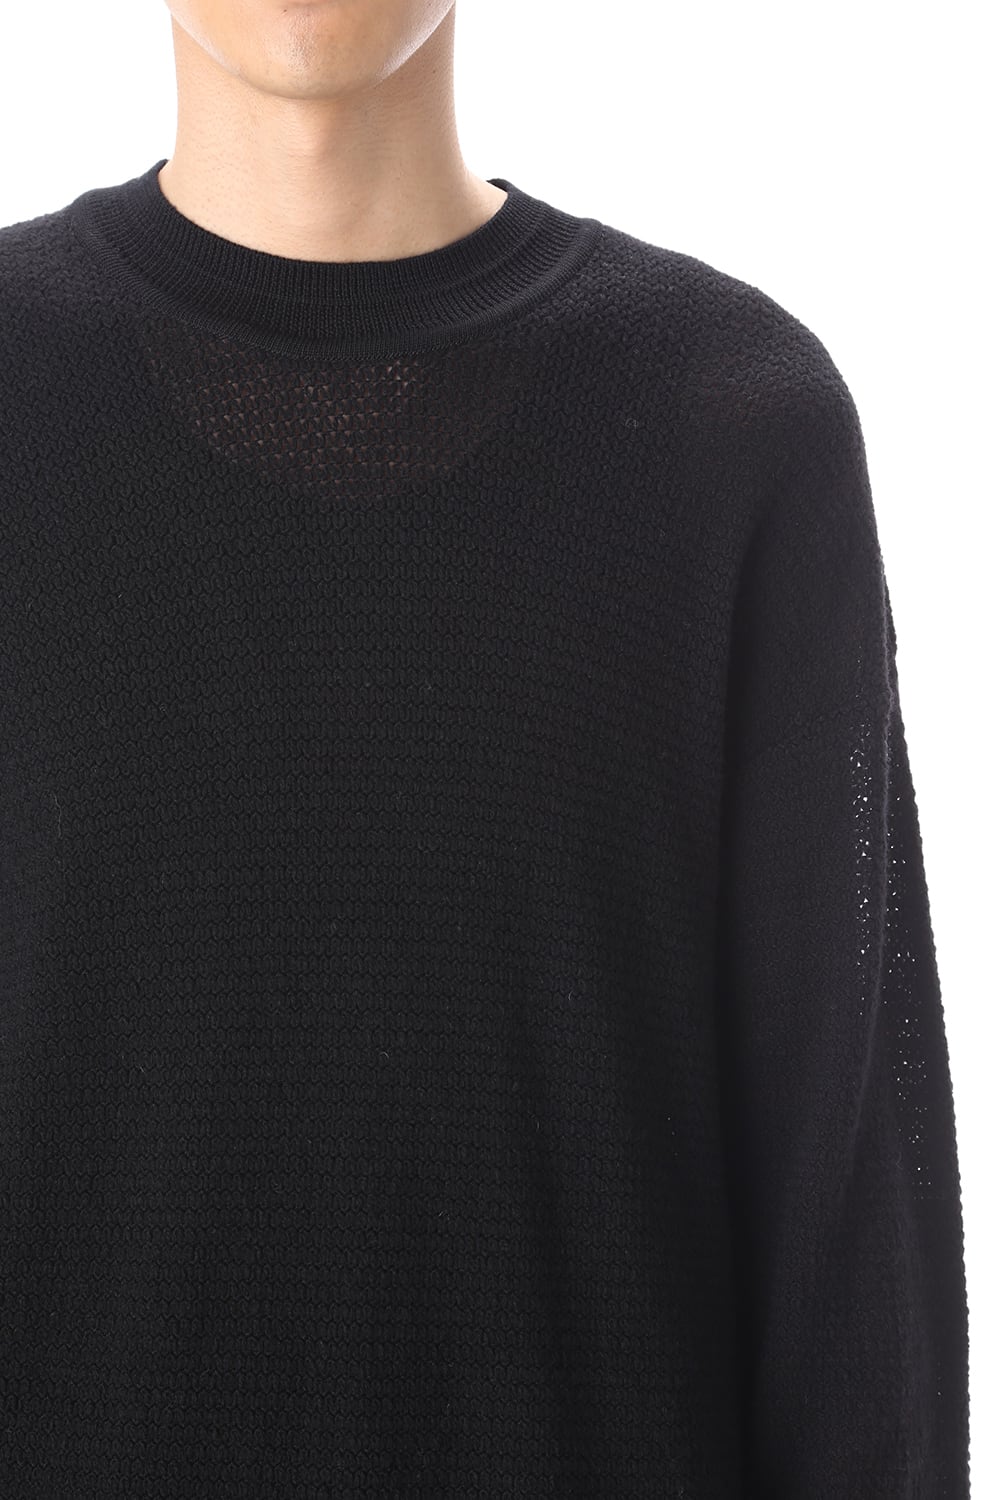 727knm3 | LS Wool pullover | JULIUS | Online Store - FASCINATE THE R OSAKA